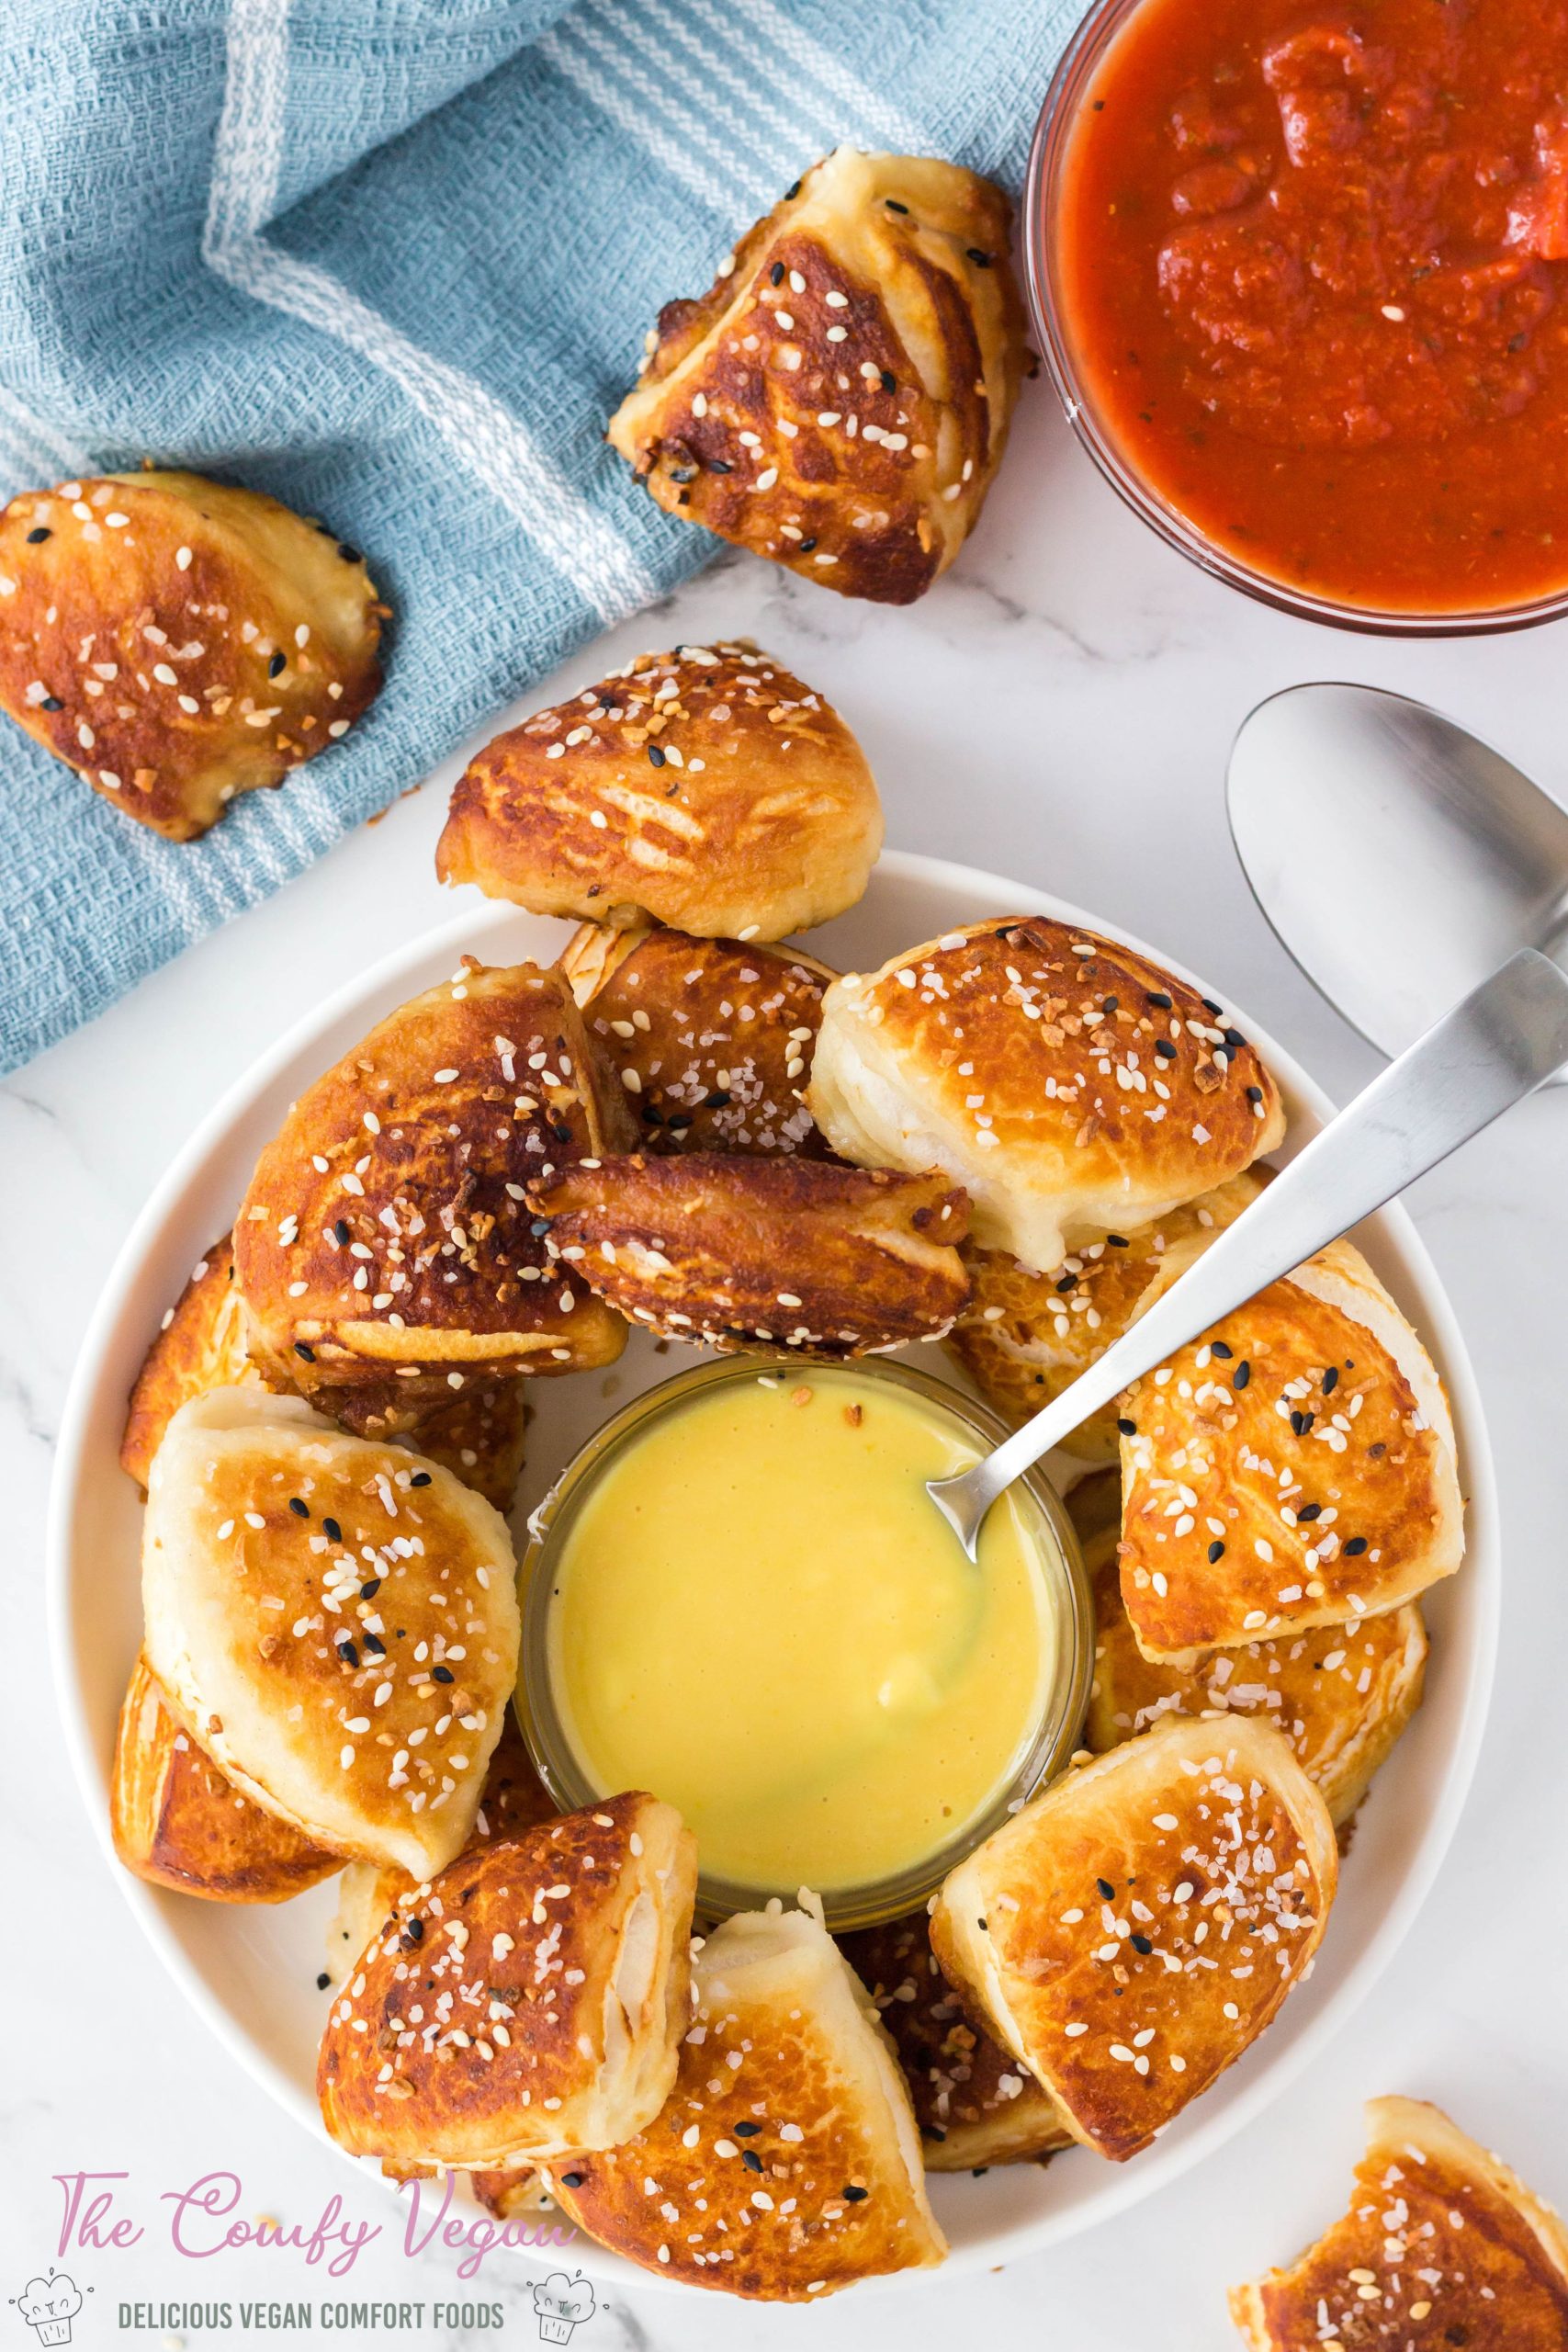 Made in a flash these Vegan Pretzel Bites are a crowd favorite. Serve these up at a family gathering, sports night, or any other time you want to impress your friends with a fun appetizer. Serve alongside your favorite dipping sauce like vegan queso, marinara, or mustard.